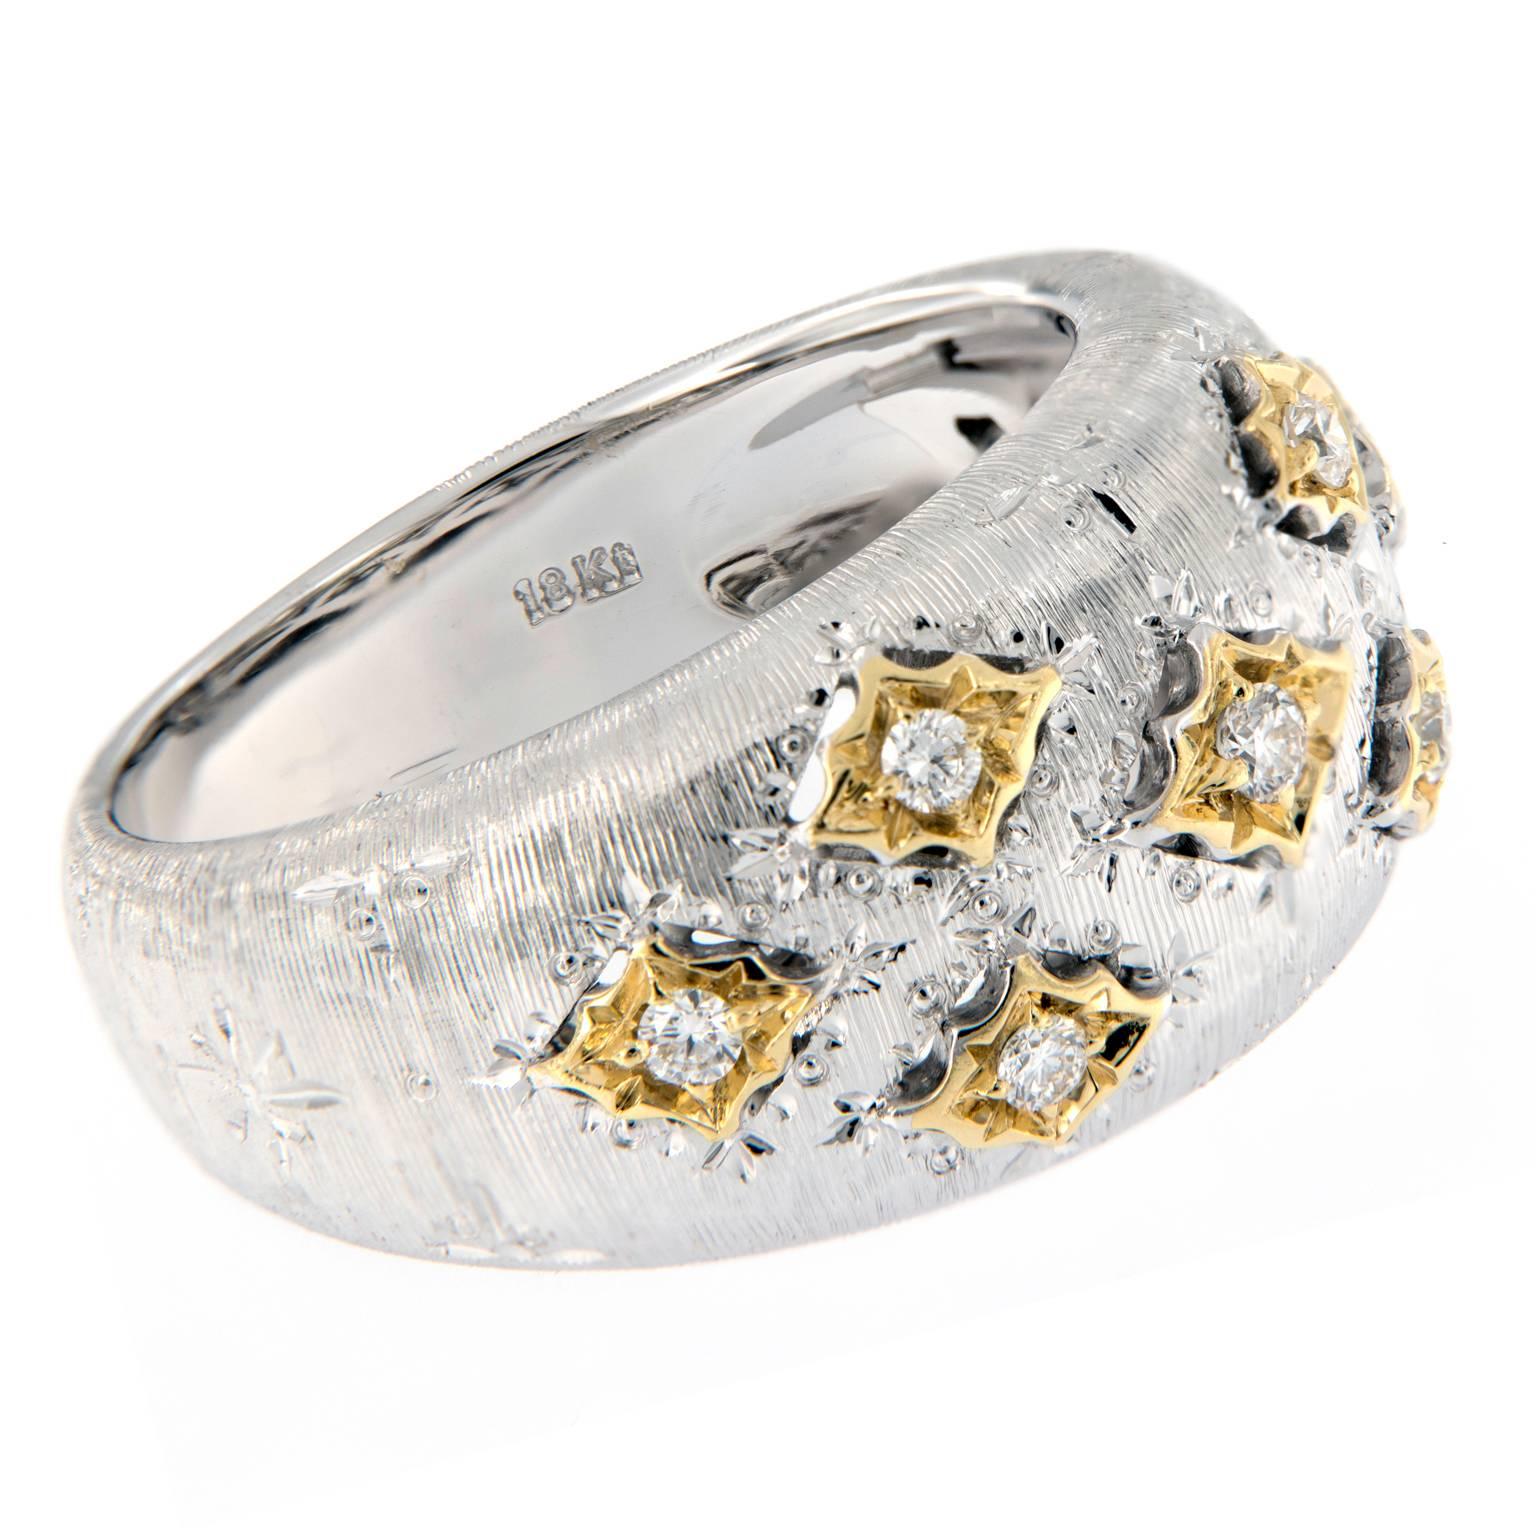 Beautifully crafted 18k yellow and white gold band ring accented with diamonds. Earrings are inspired by the classic Buccellati design featuring textured gold made to look like fine fabric. Weighs 10.8 grams. Ring size 7.25.

Diamonds 0.16